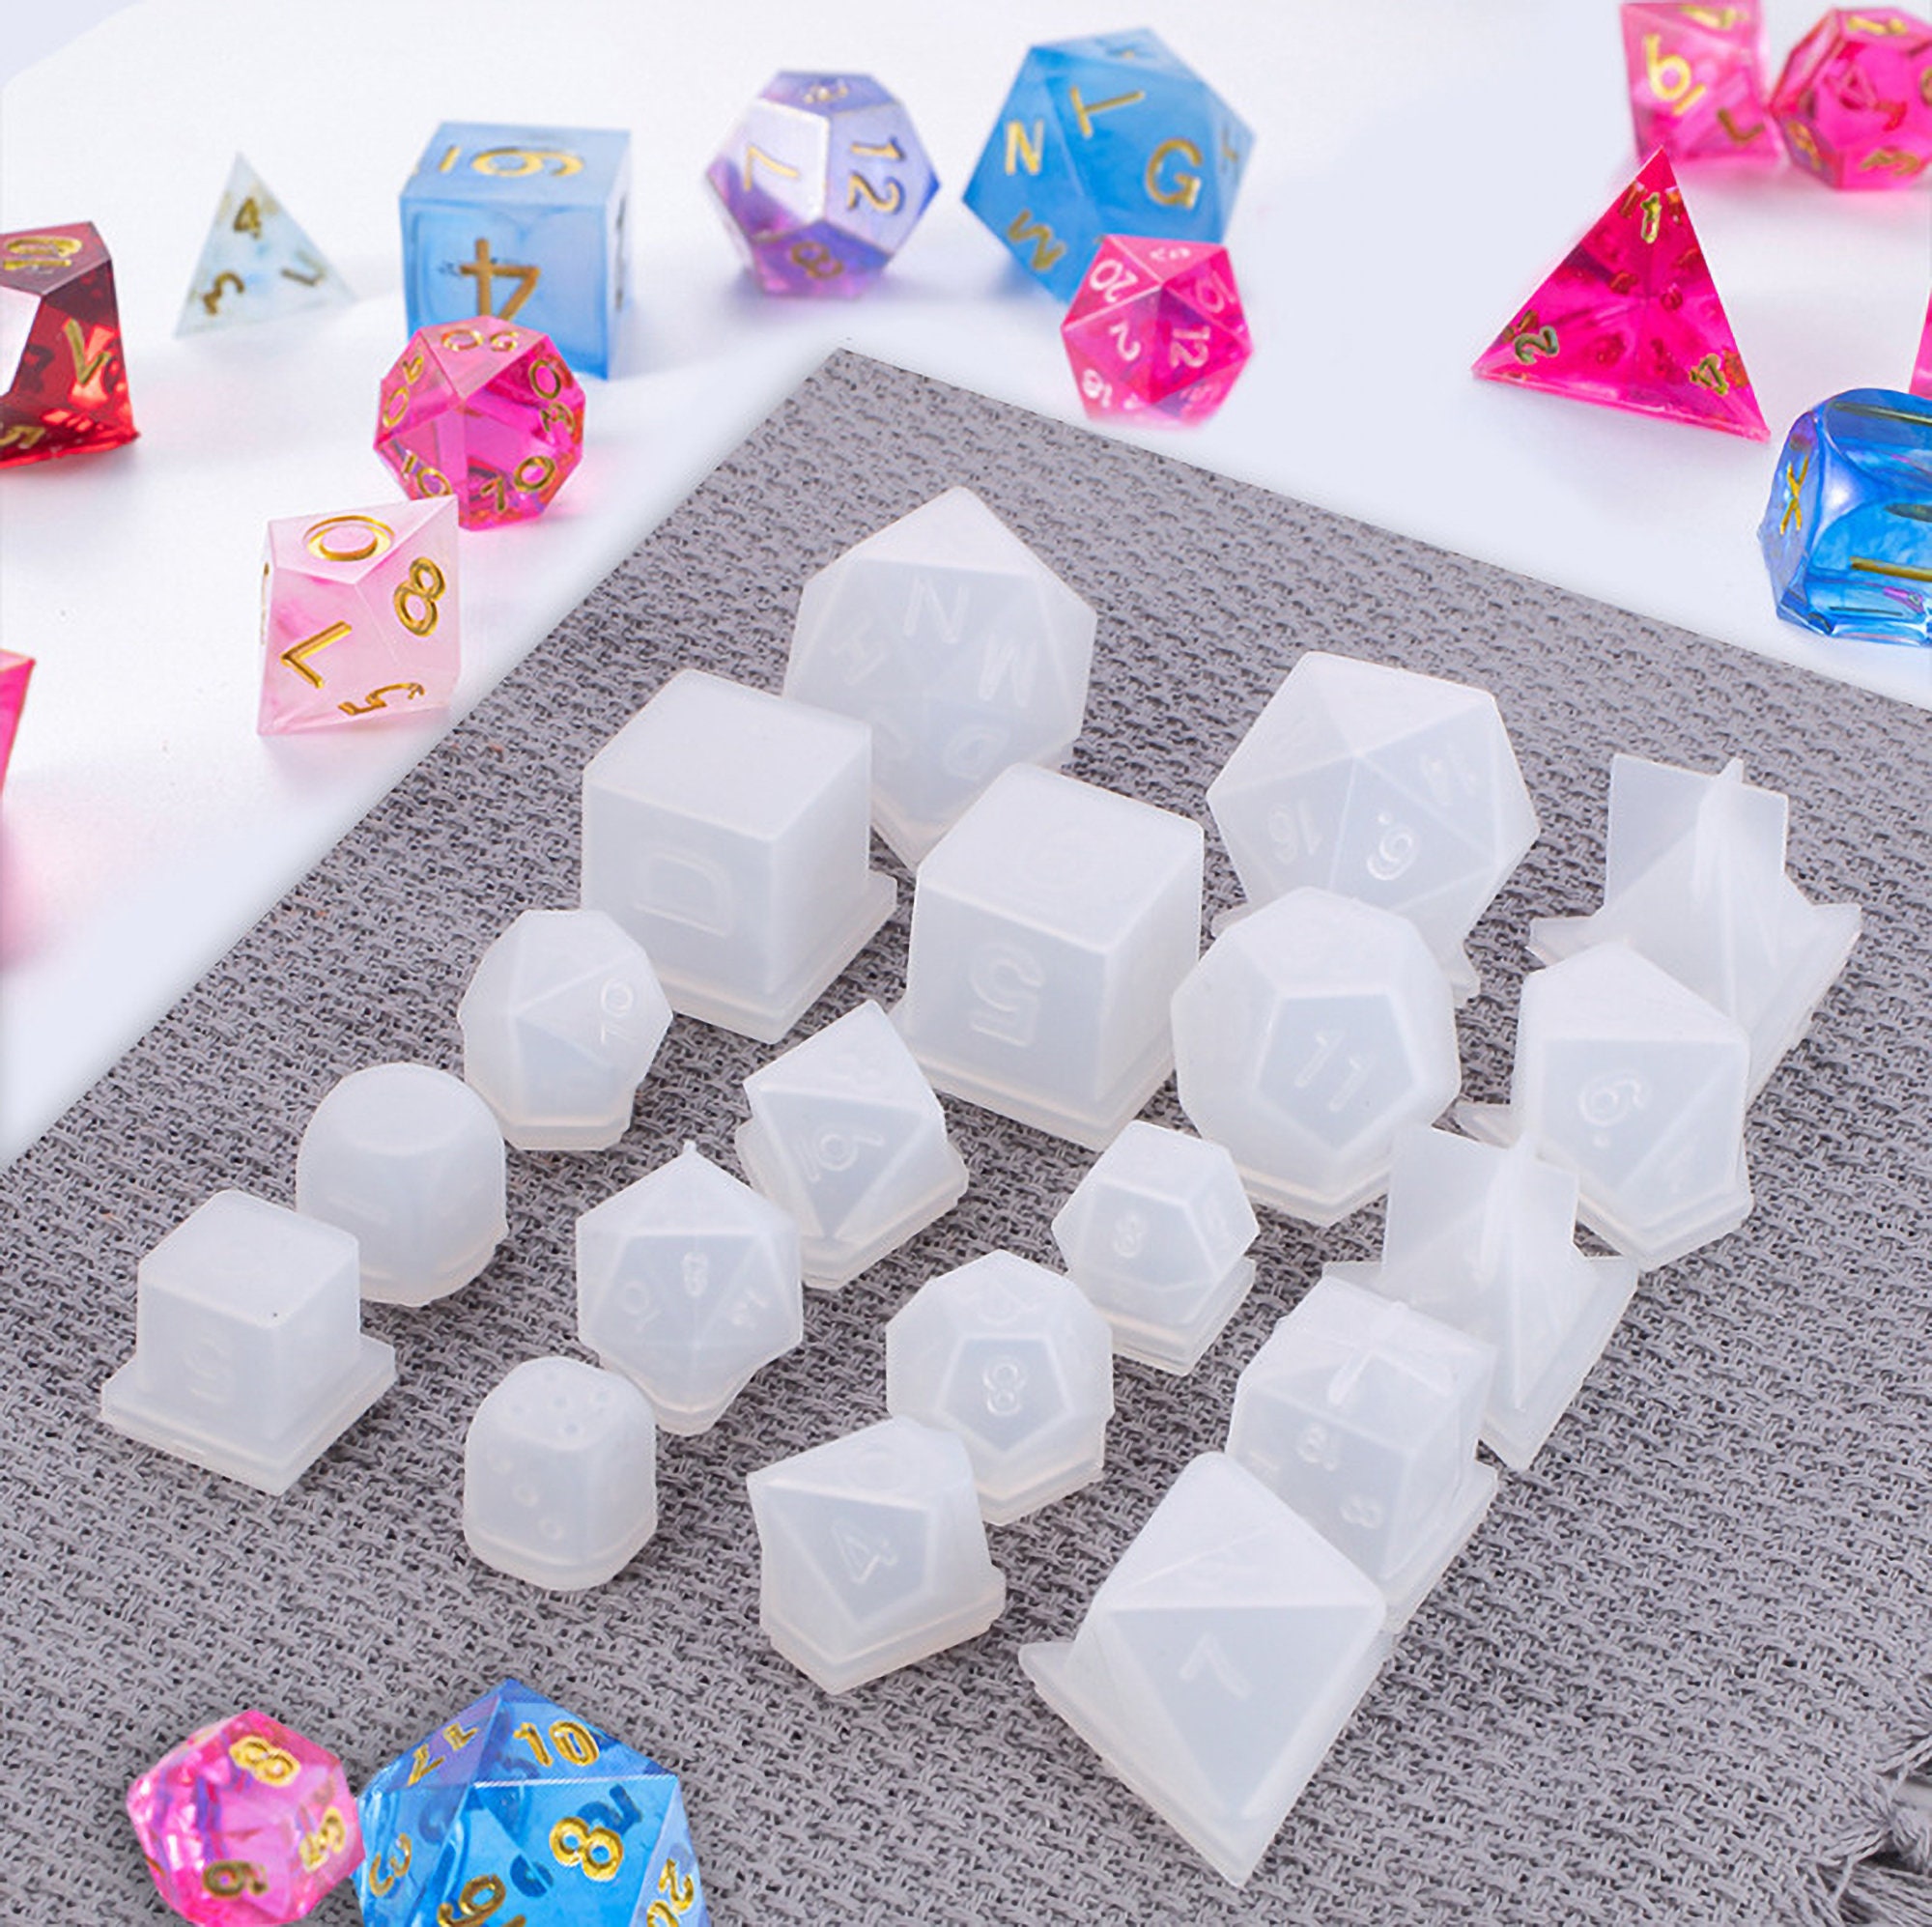 Dice Resin Mold, Dice Mold Set, Polyhedral Game Dice Molds, Multi-faceted Dice  Mold, DIY Jewelry Keychain Pendant Earrings Pendant 